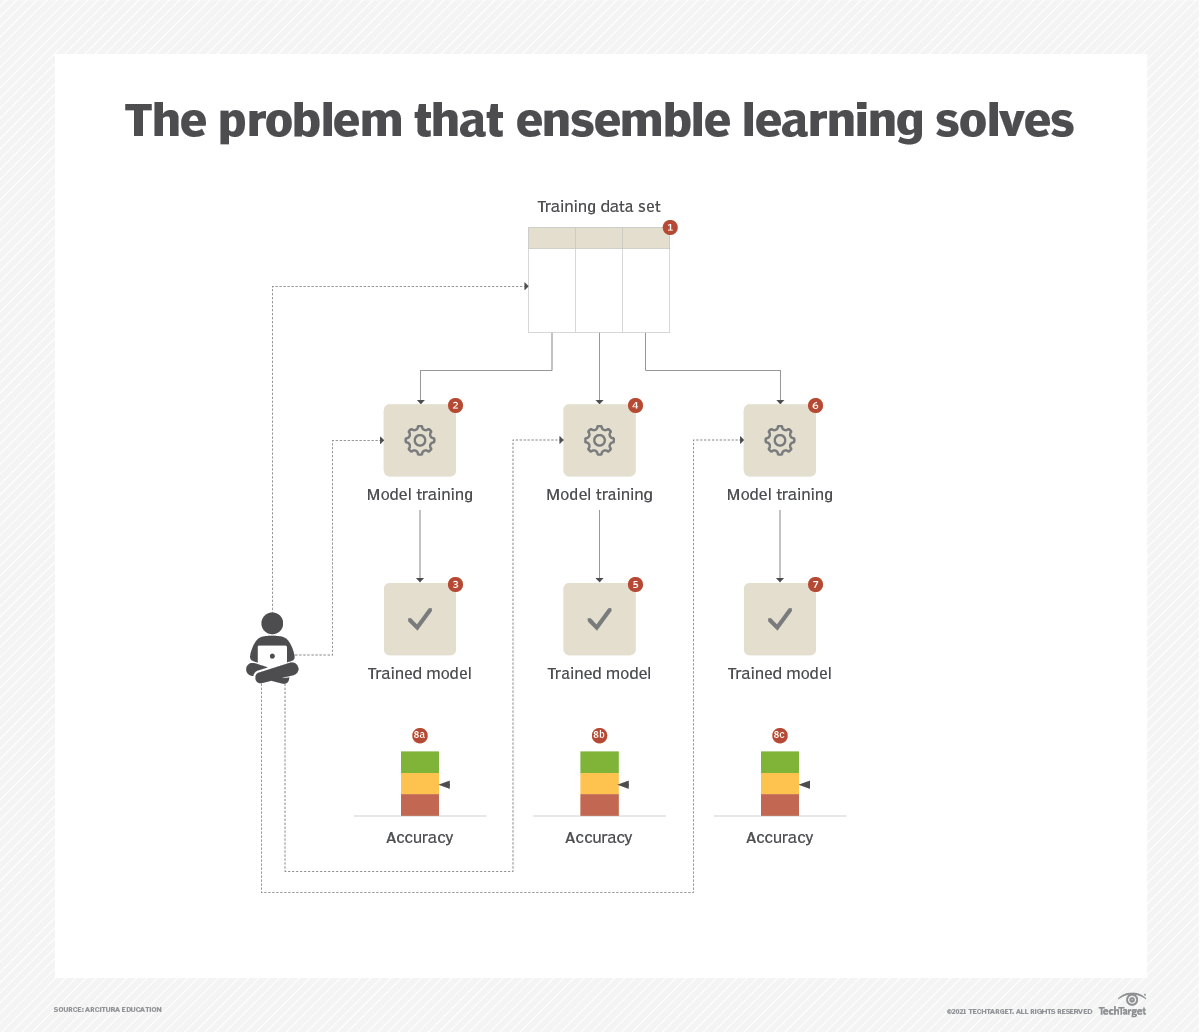 The problem that ensemble learning solves